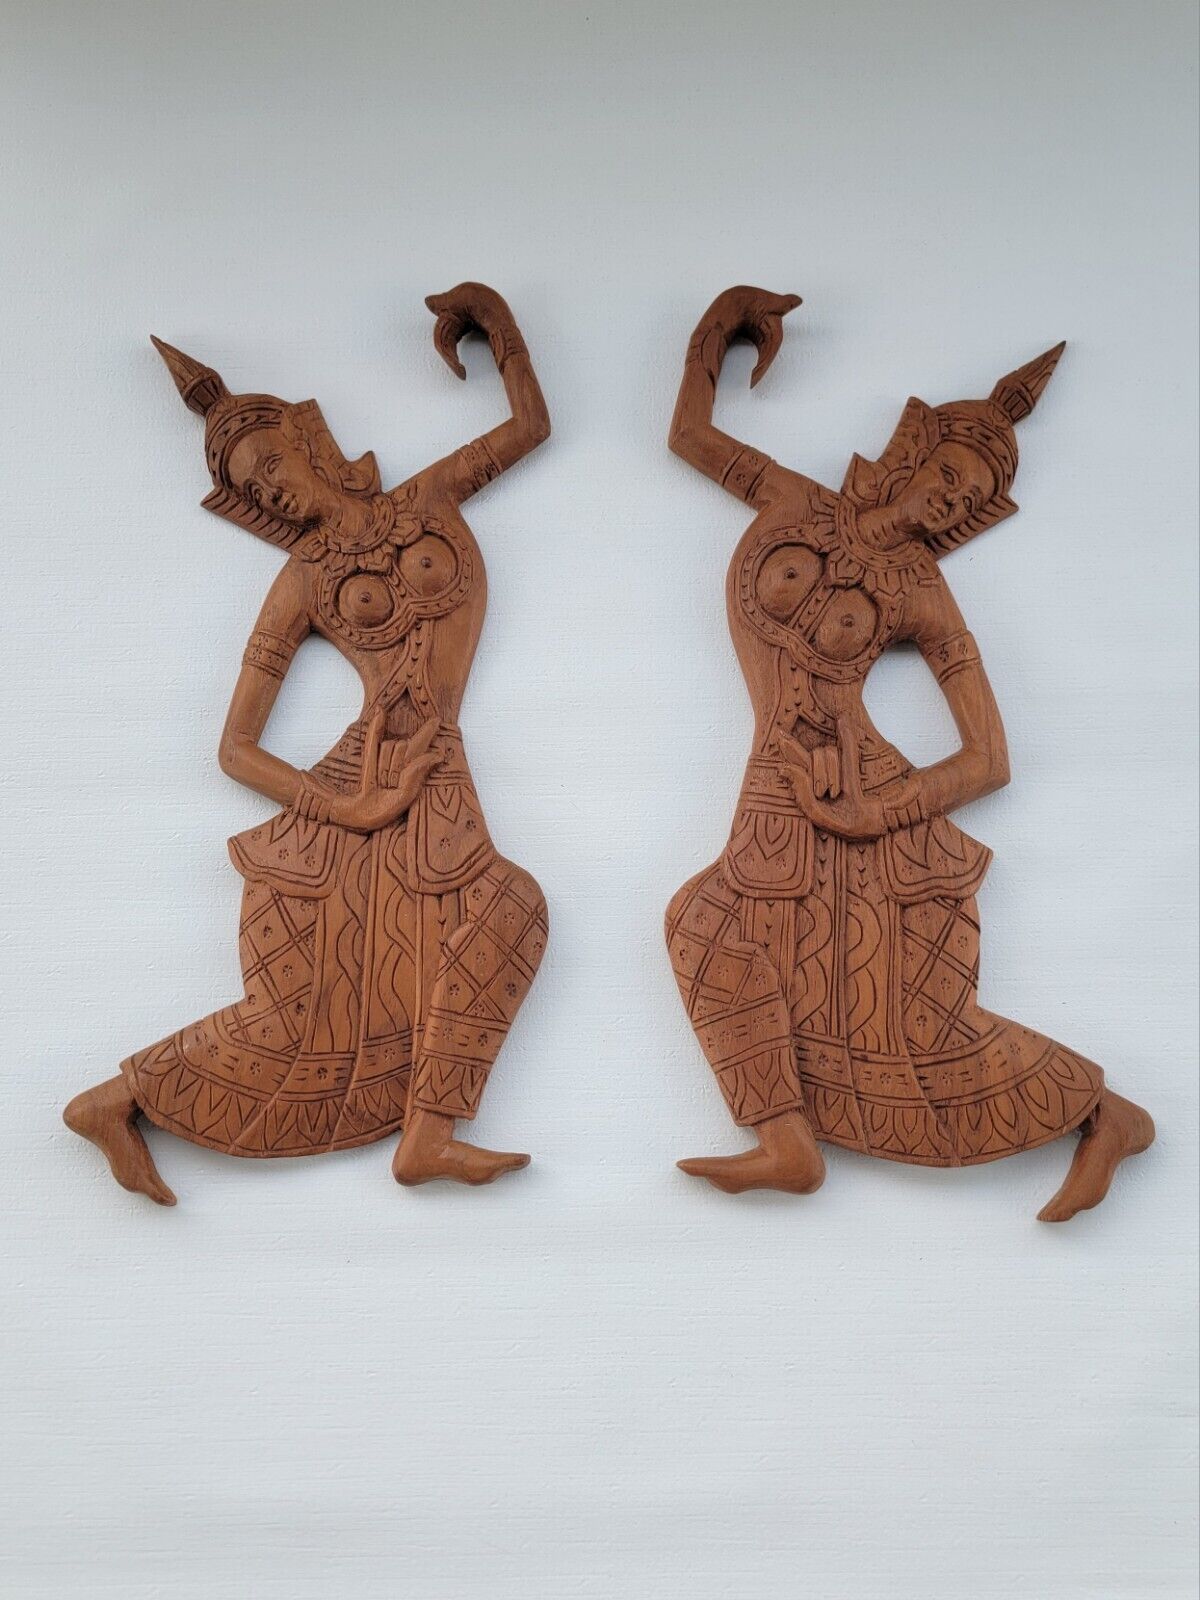 SET OF 2 WALL SCULPTURES, STUNNING VTG WOOD CARVING - Asian Dancing Women - SIAM